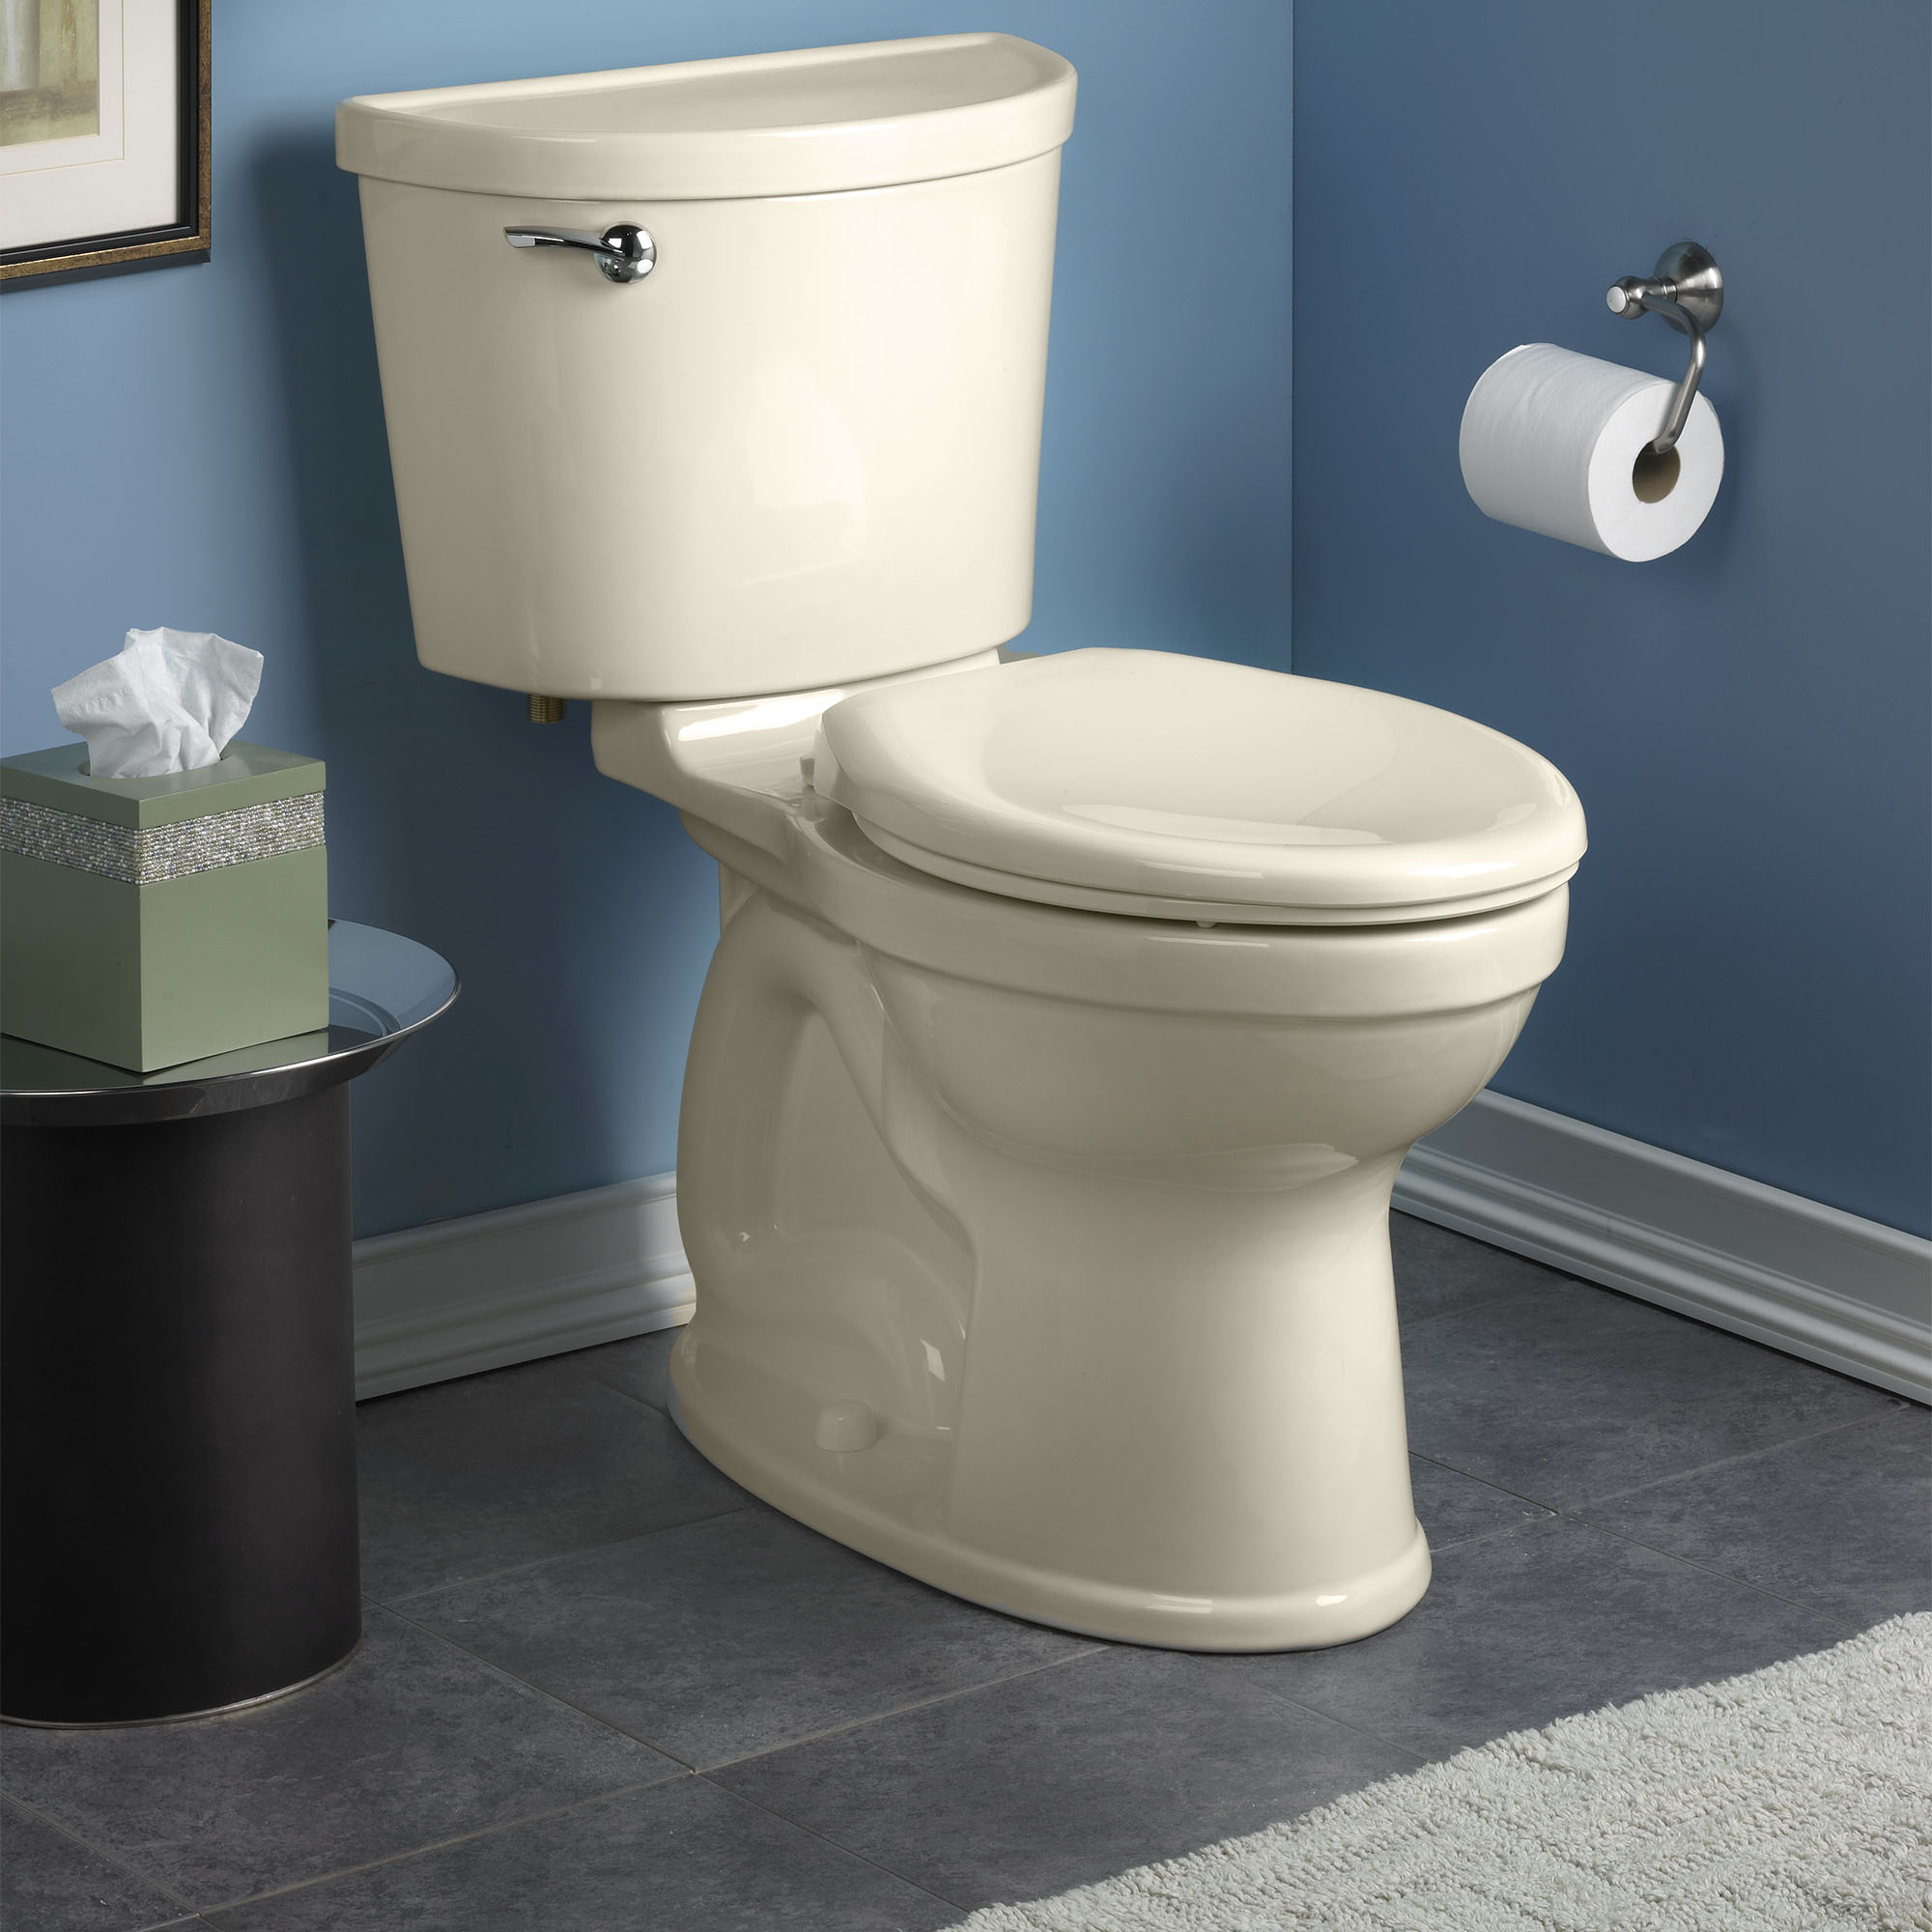 Champion® PRO Two-Piece 1.6 gpf/6.0 Lpf Chair Height Round Front Toilet Less Seat